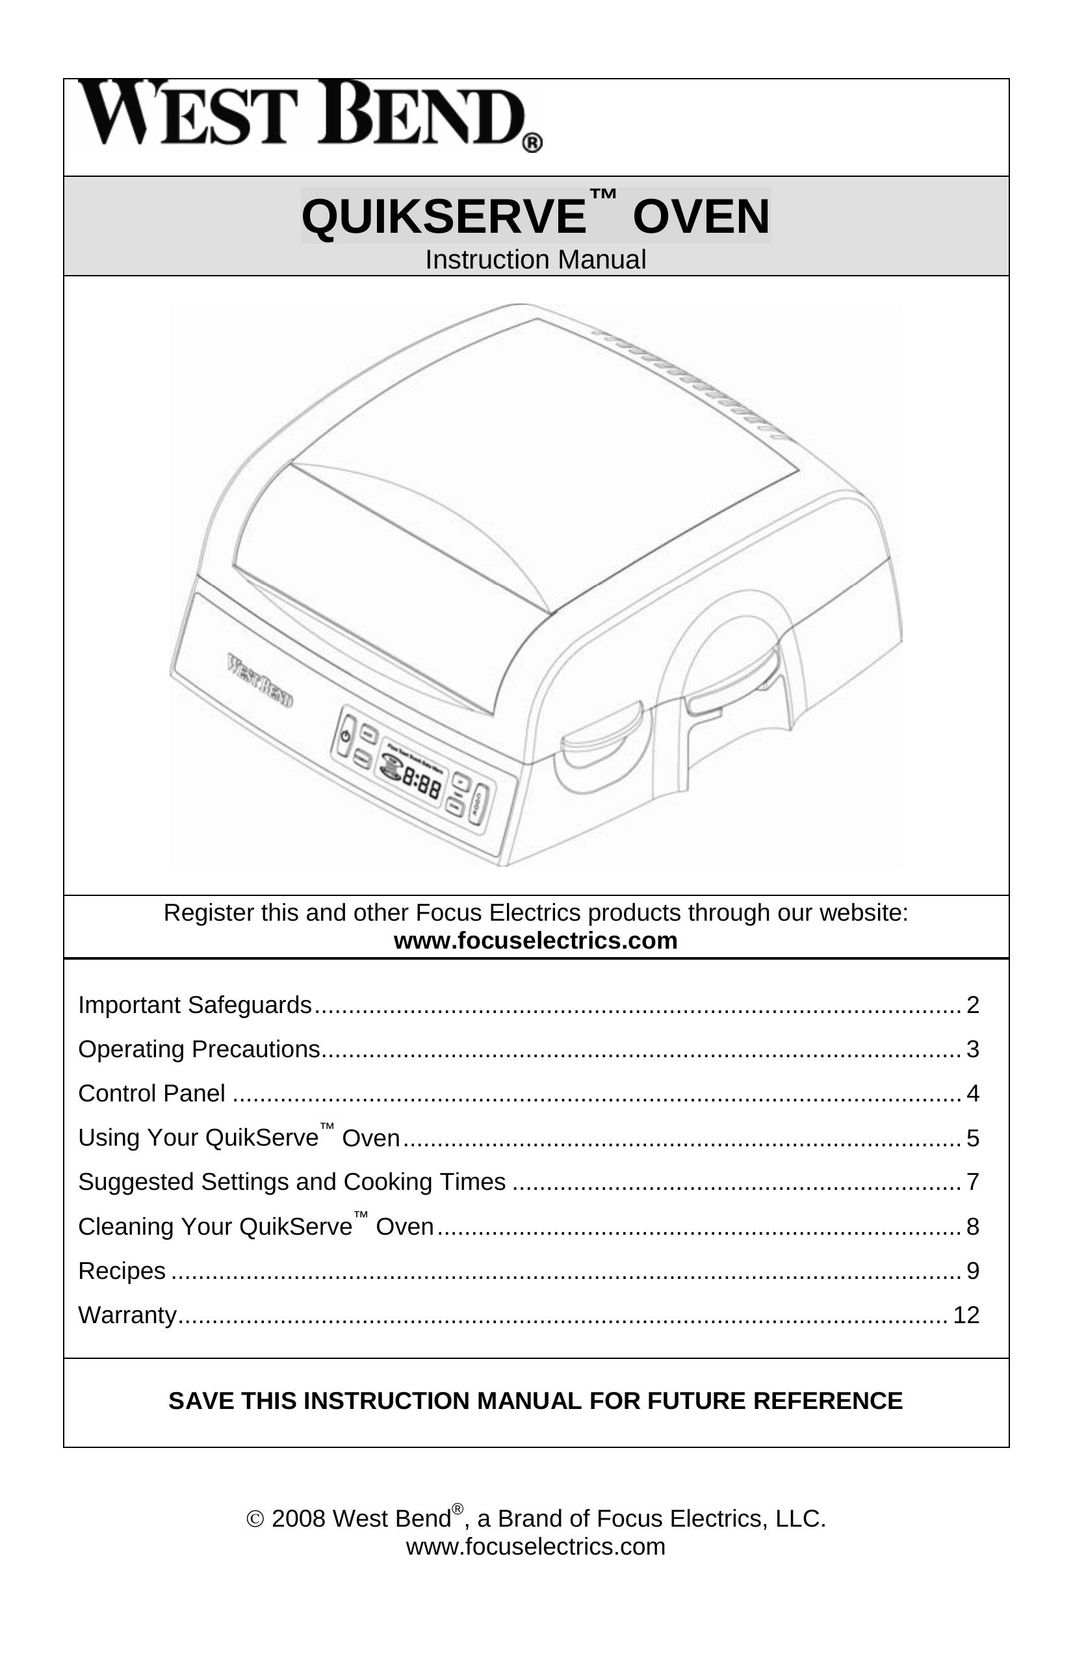 West Bend L5758 Oven User Manual